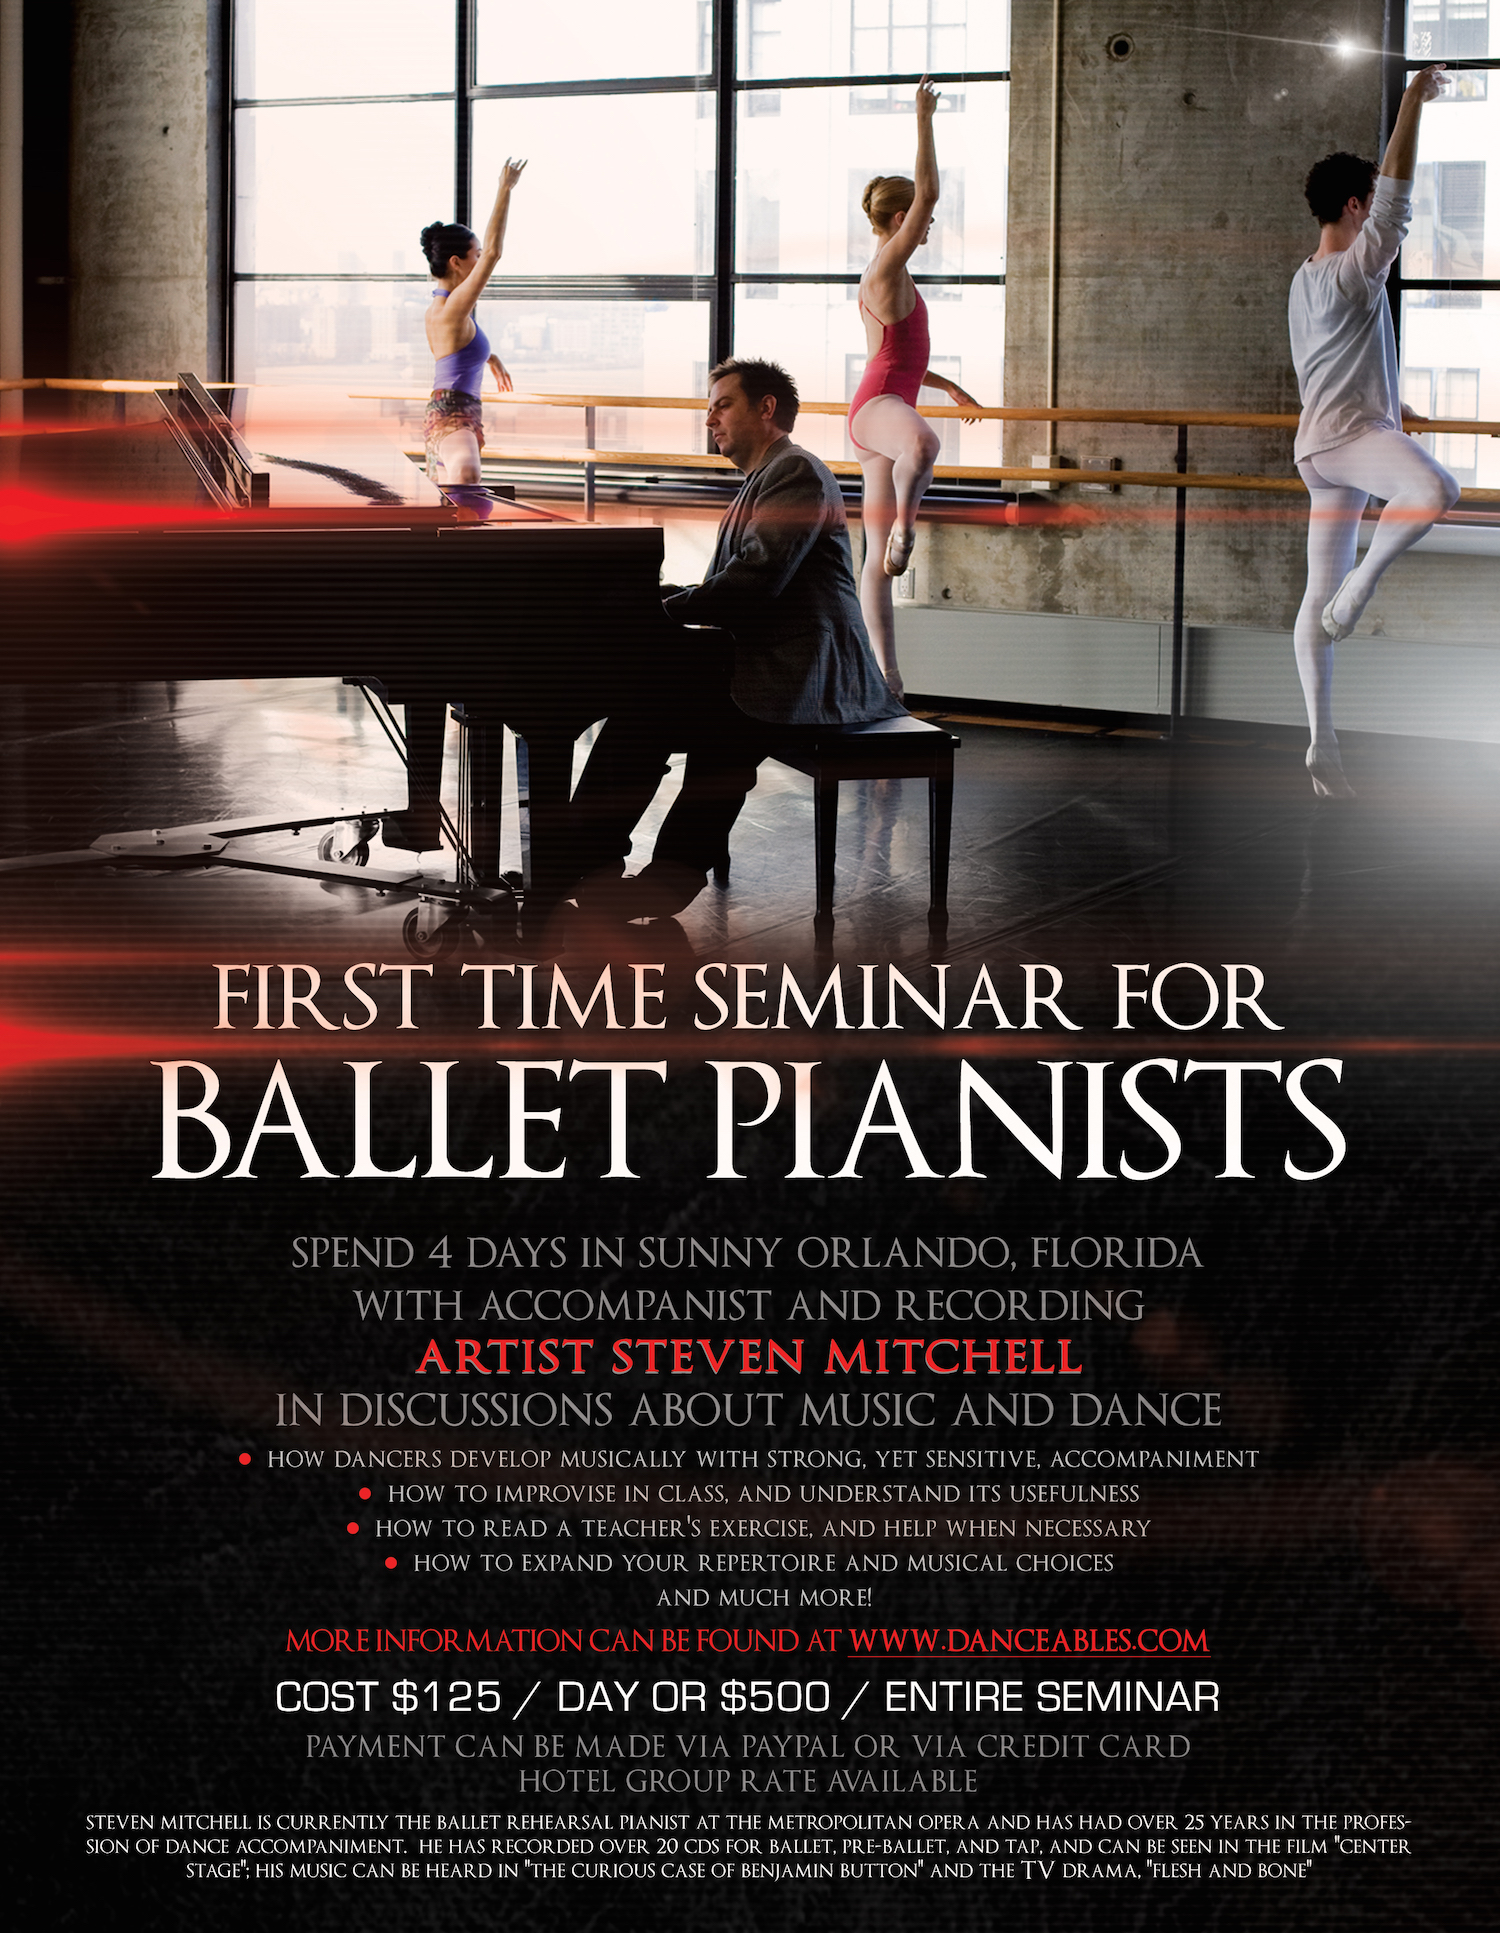 Steven Mitchell trains on how to be a Ballet Pianist